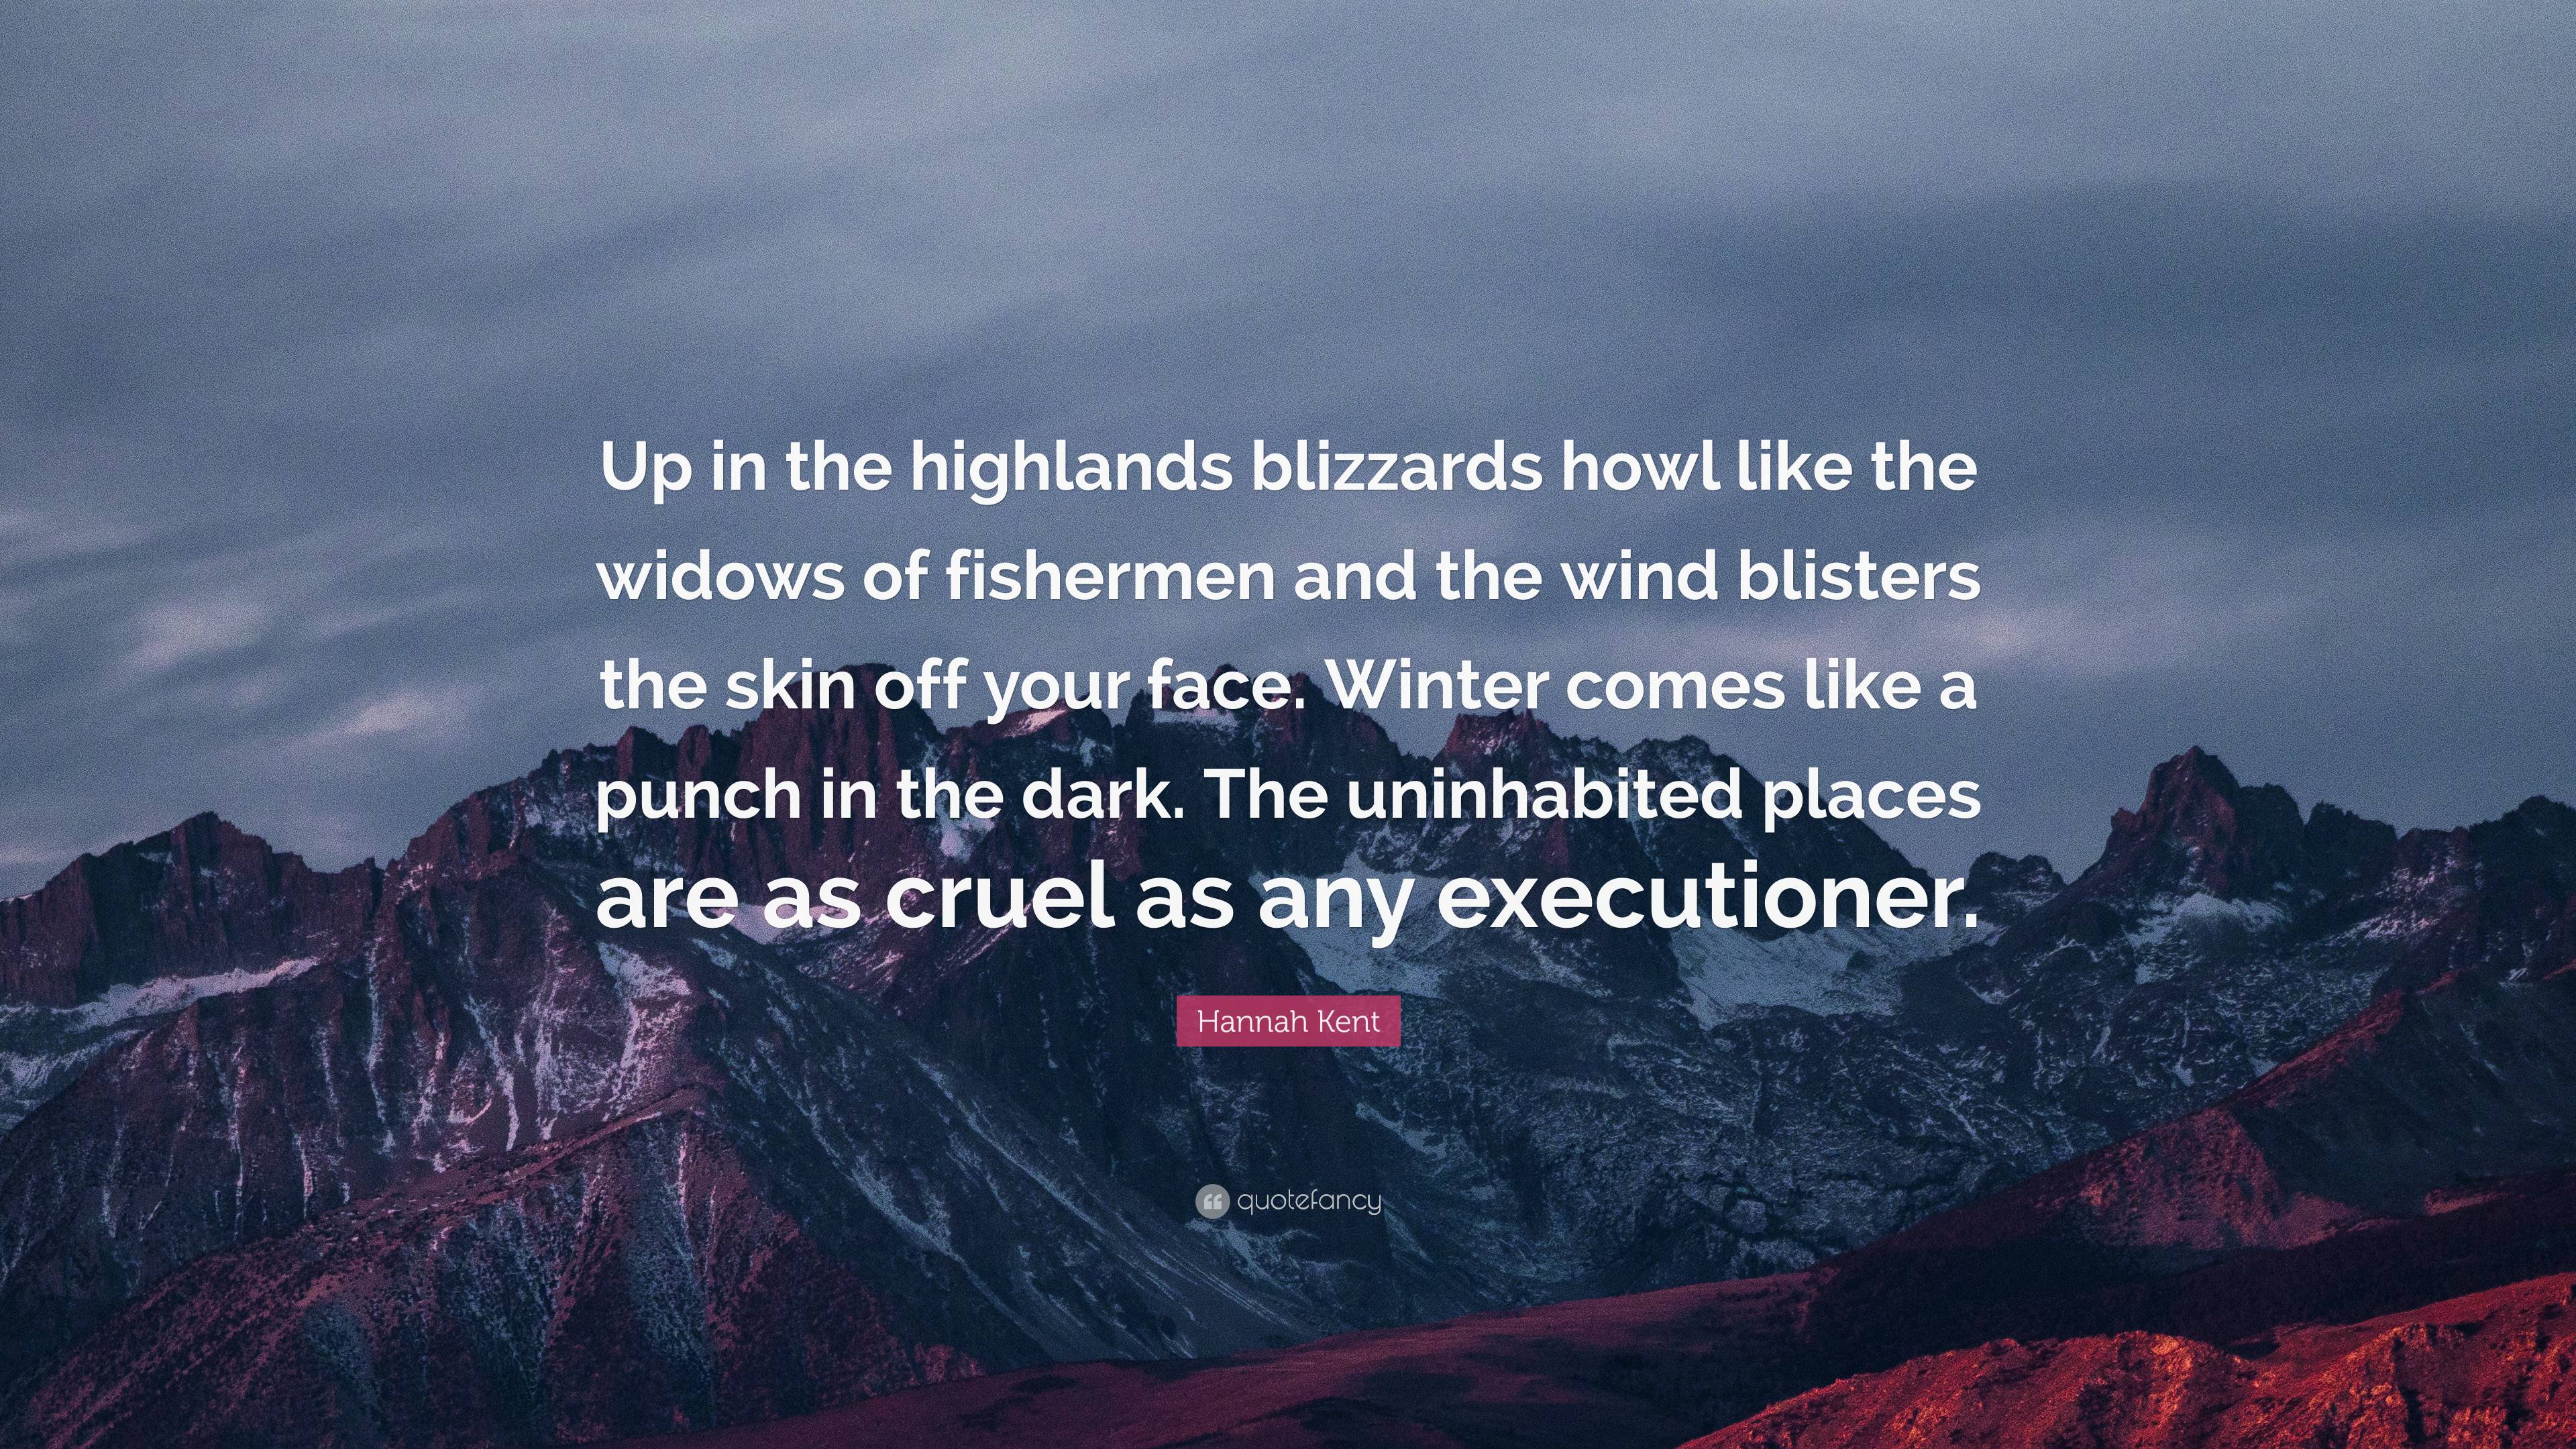 Hannah Kent Quote: “Up in the highlands blizzards howl like the widows ...